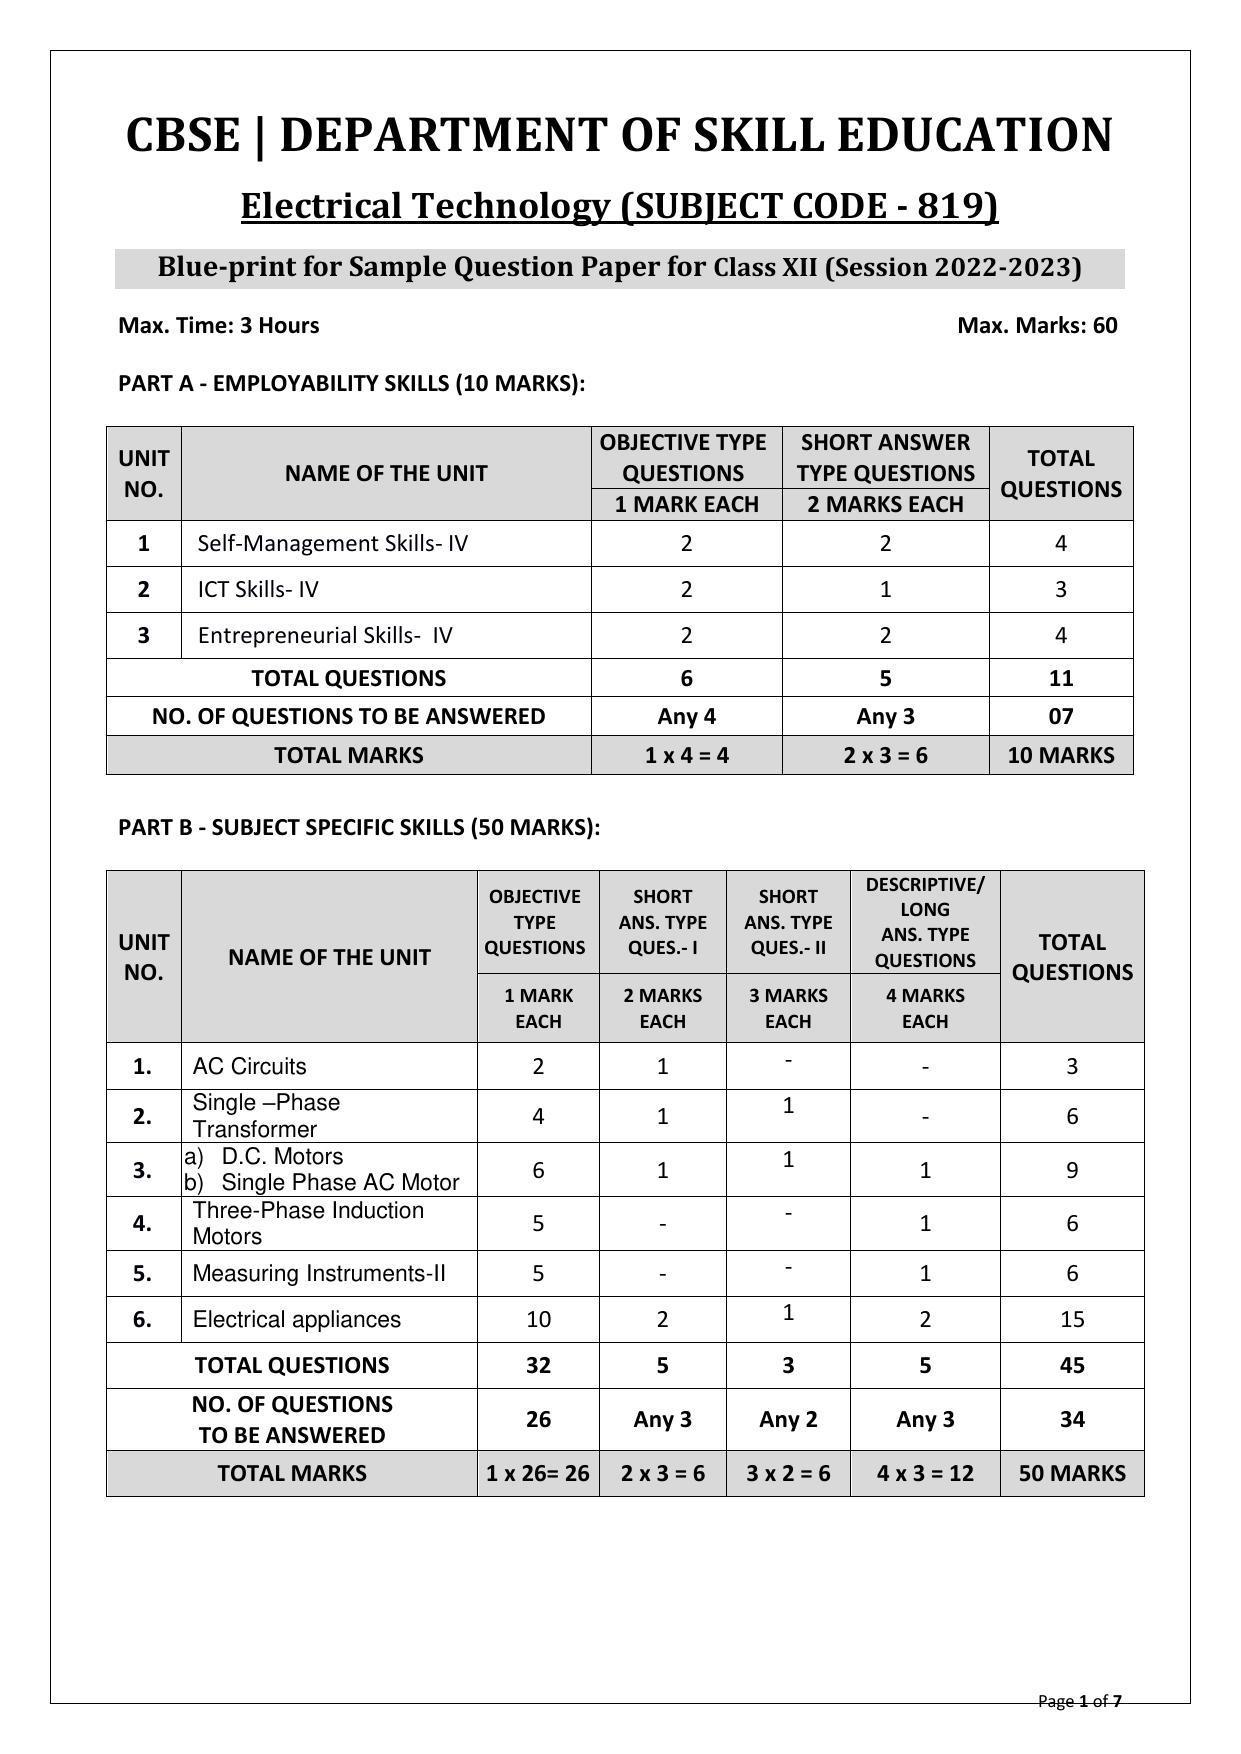 CBSE Class 12 Electrical Technology (Skill Education) Sample Papers 2023 - Page 1